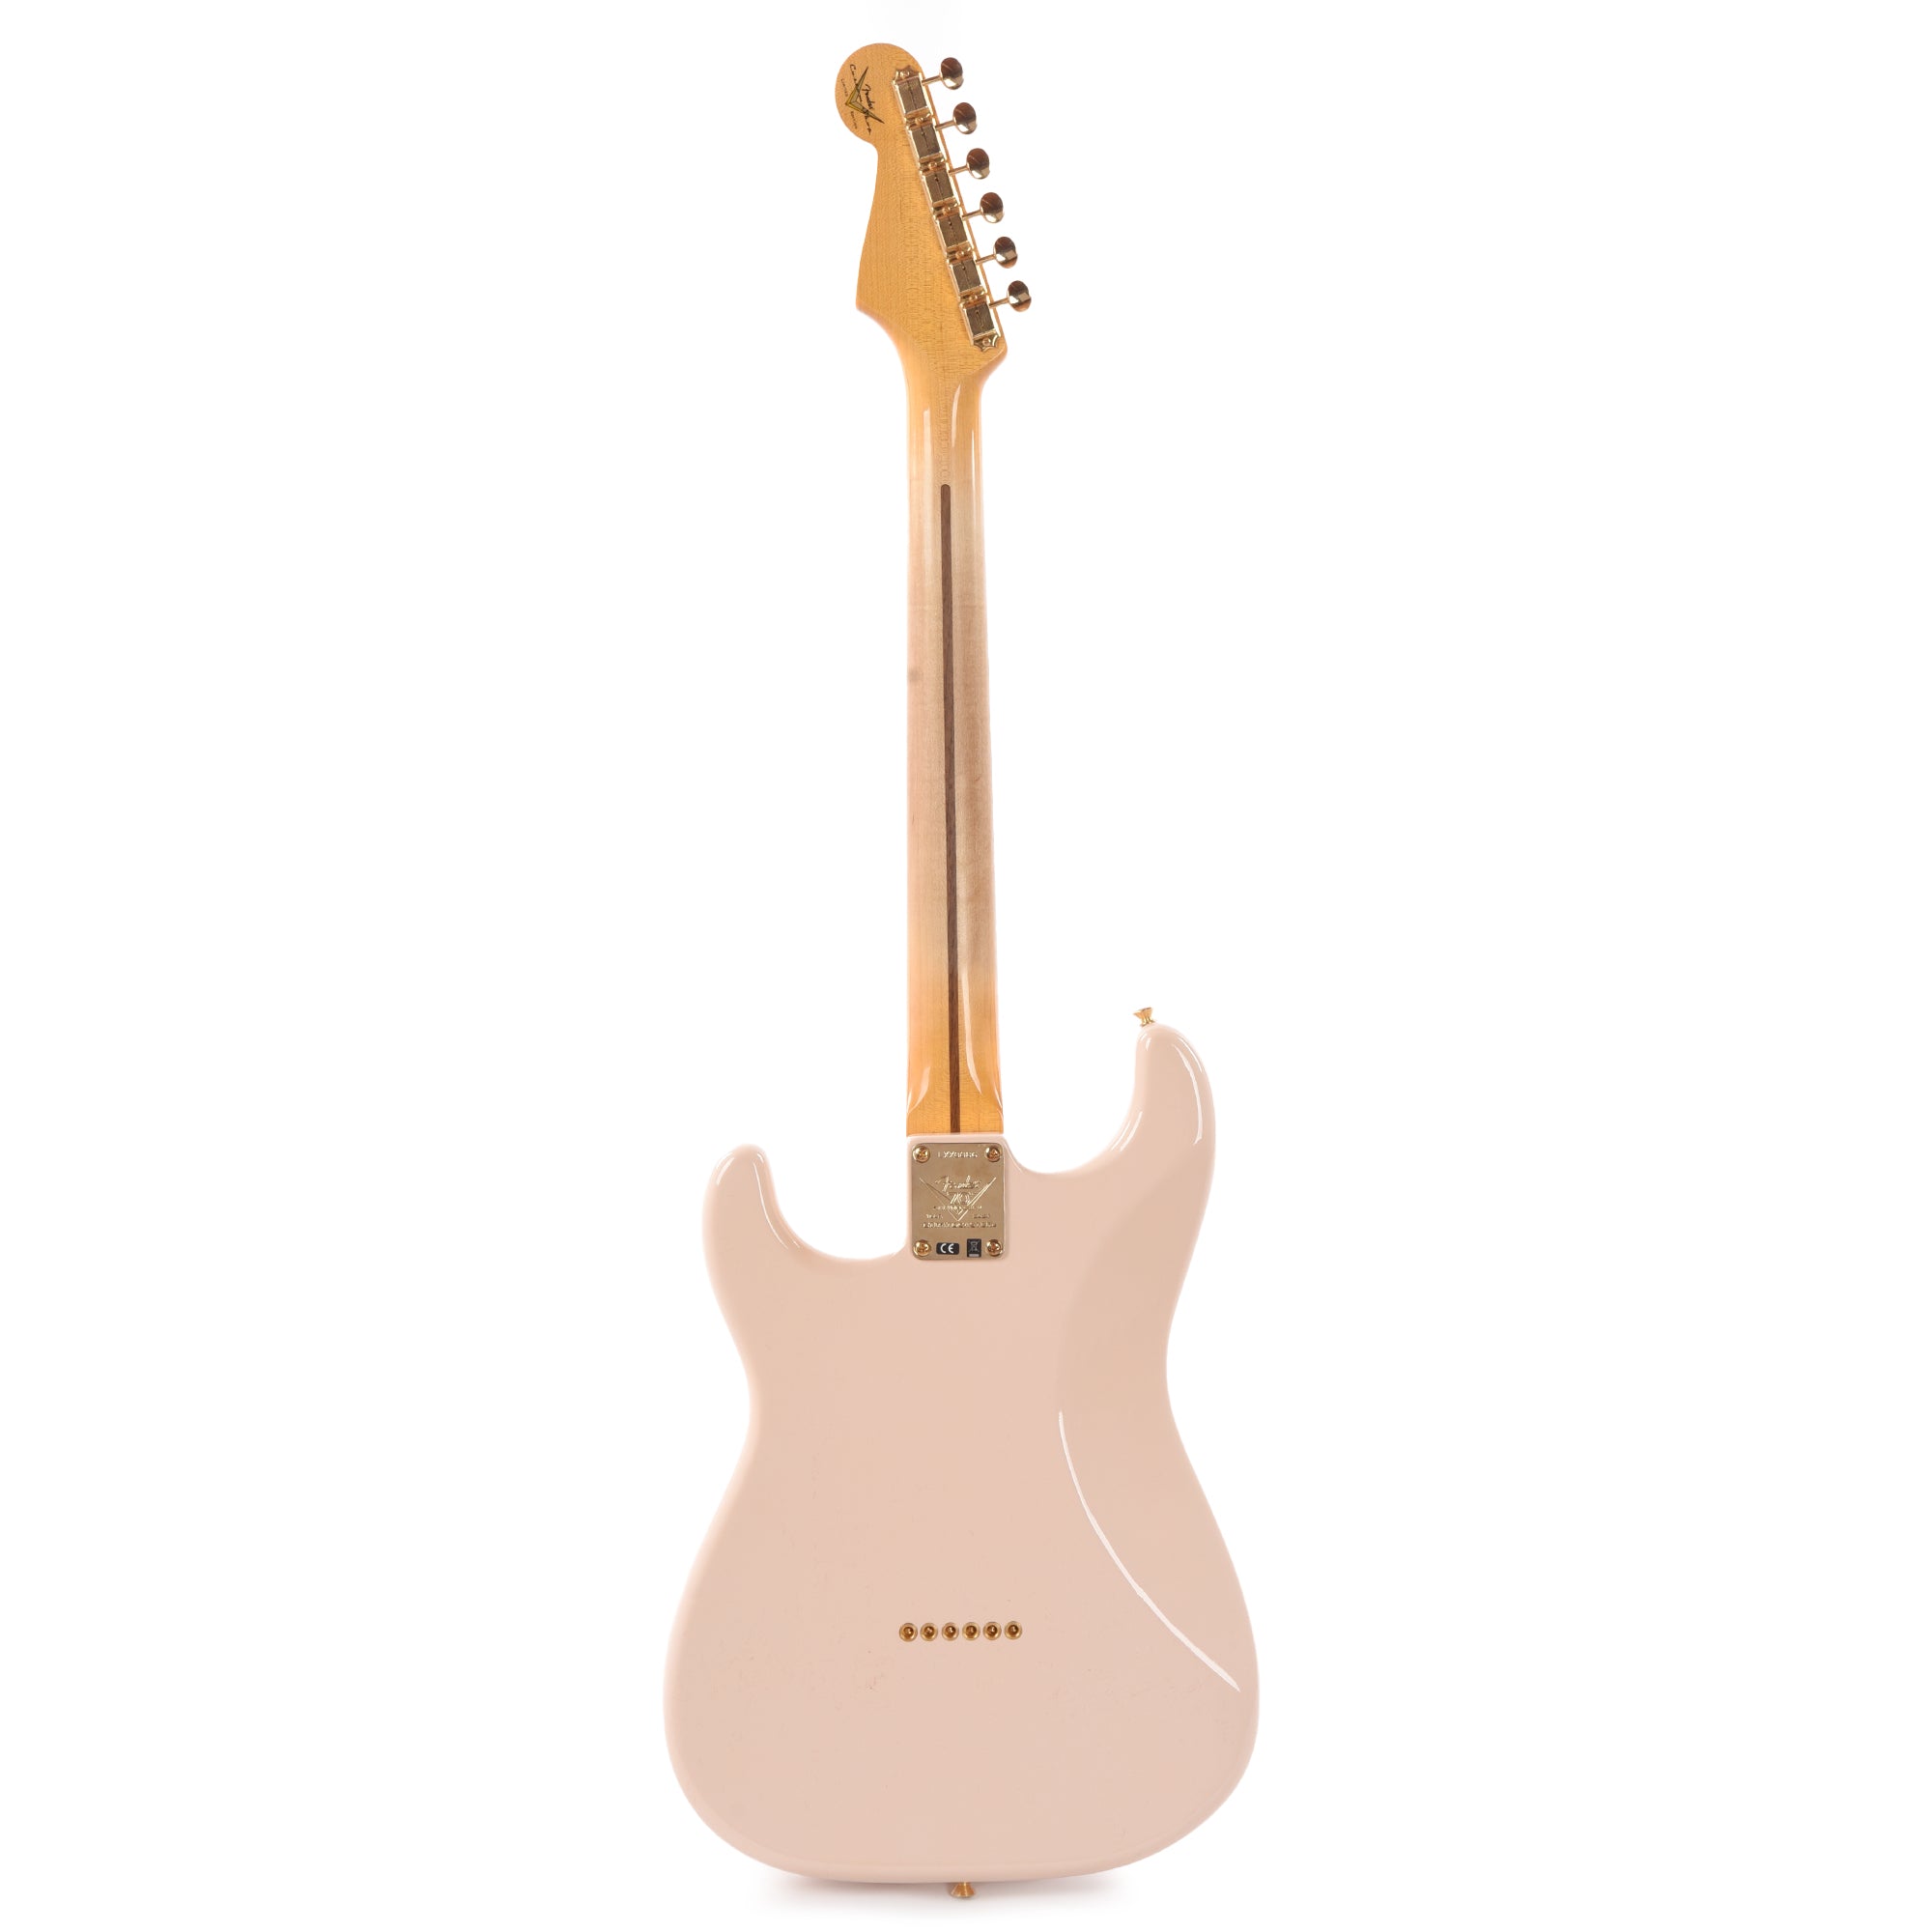 Fender Custom Shop Limited Edition '54 Hardtail Stratocaster Deluxe Closet Classic with Gold Hardware Super/Super Faded Aged Shell Pink